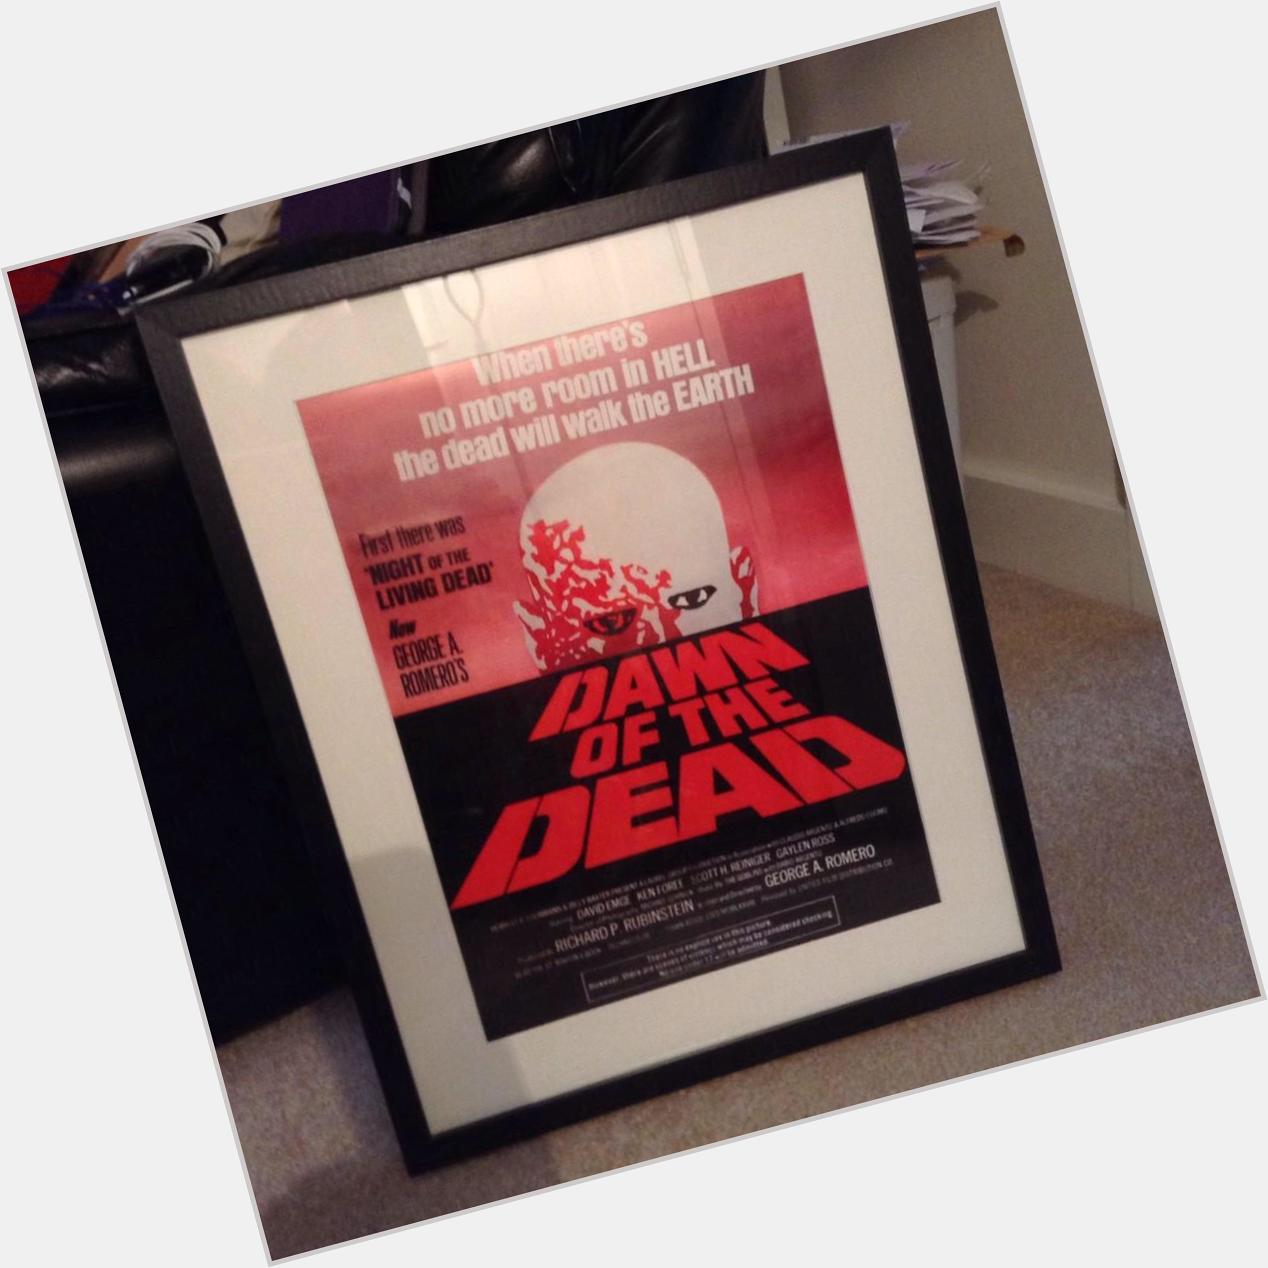 Happy Birthday to George A Romero, creator of my all time favourite film. Watch \Dawn of the Dead\ to celebrate! 